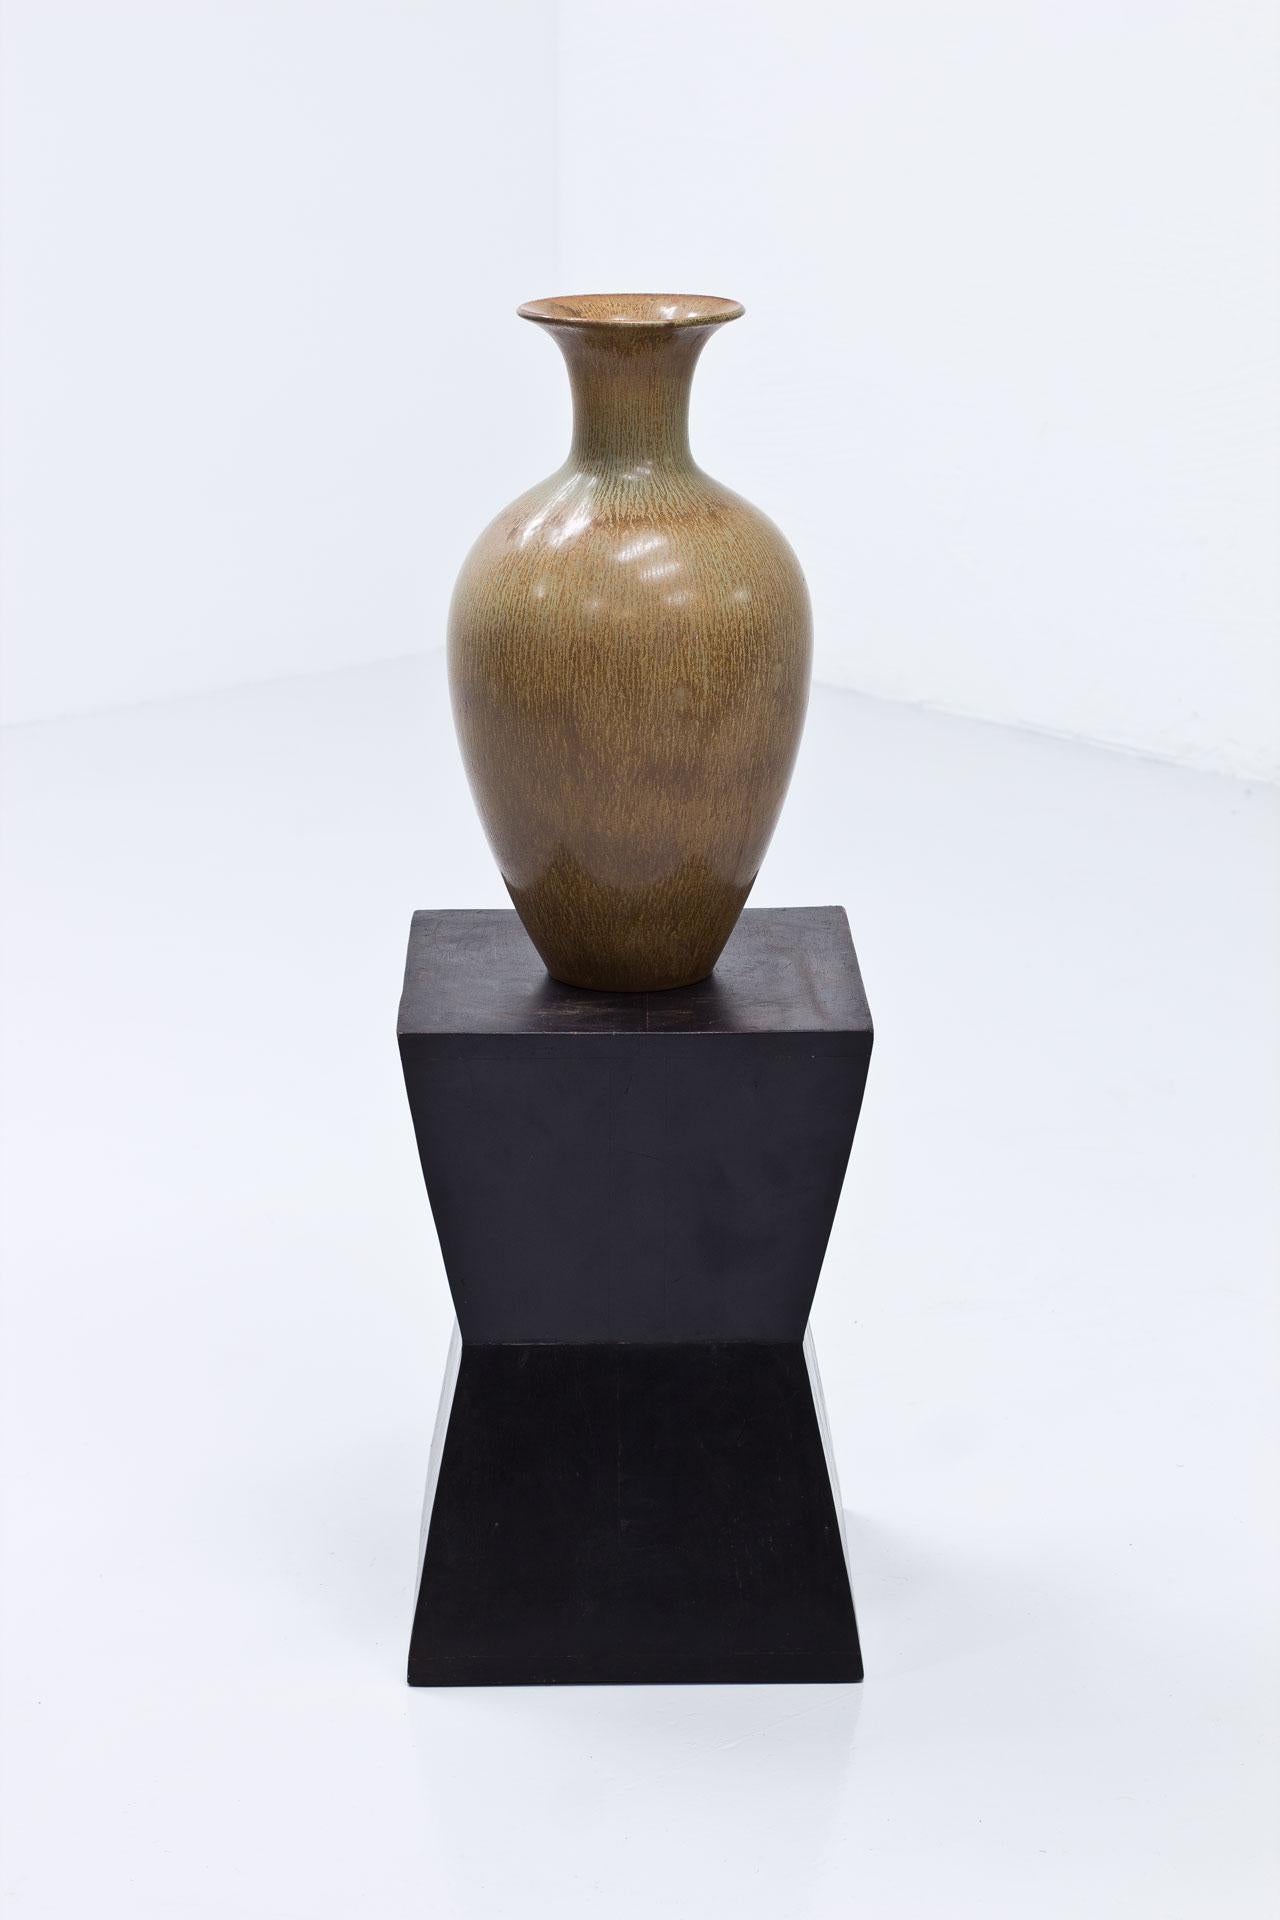 Timeless ceramic floor vase designed by Gunnar Nylund. Manufactured by Rörstrand in Sweden during the 1950s. The vase is made from stoneware with a hare fur glaze shifting in between light brown and green.
Good condition, second sorting with minor